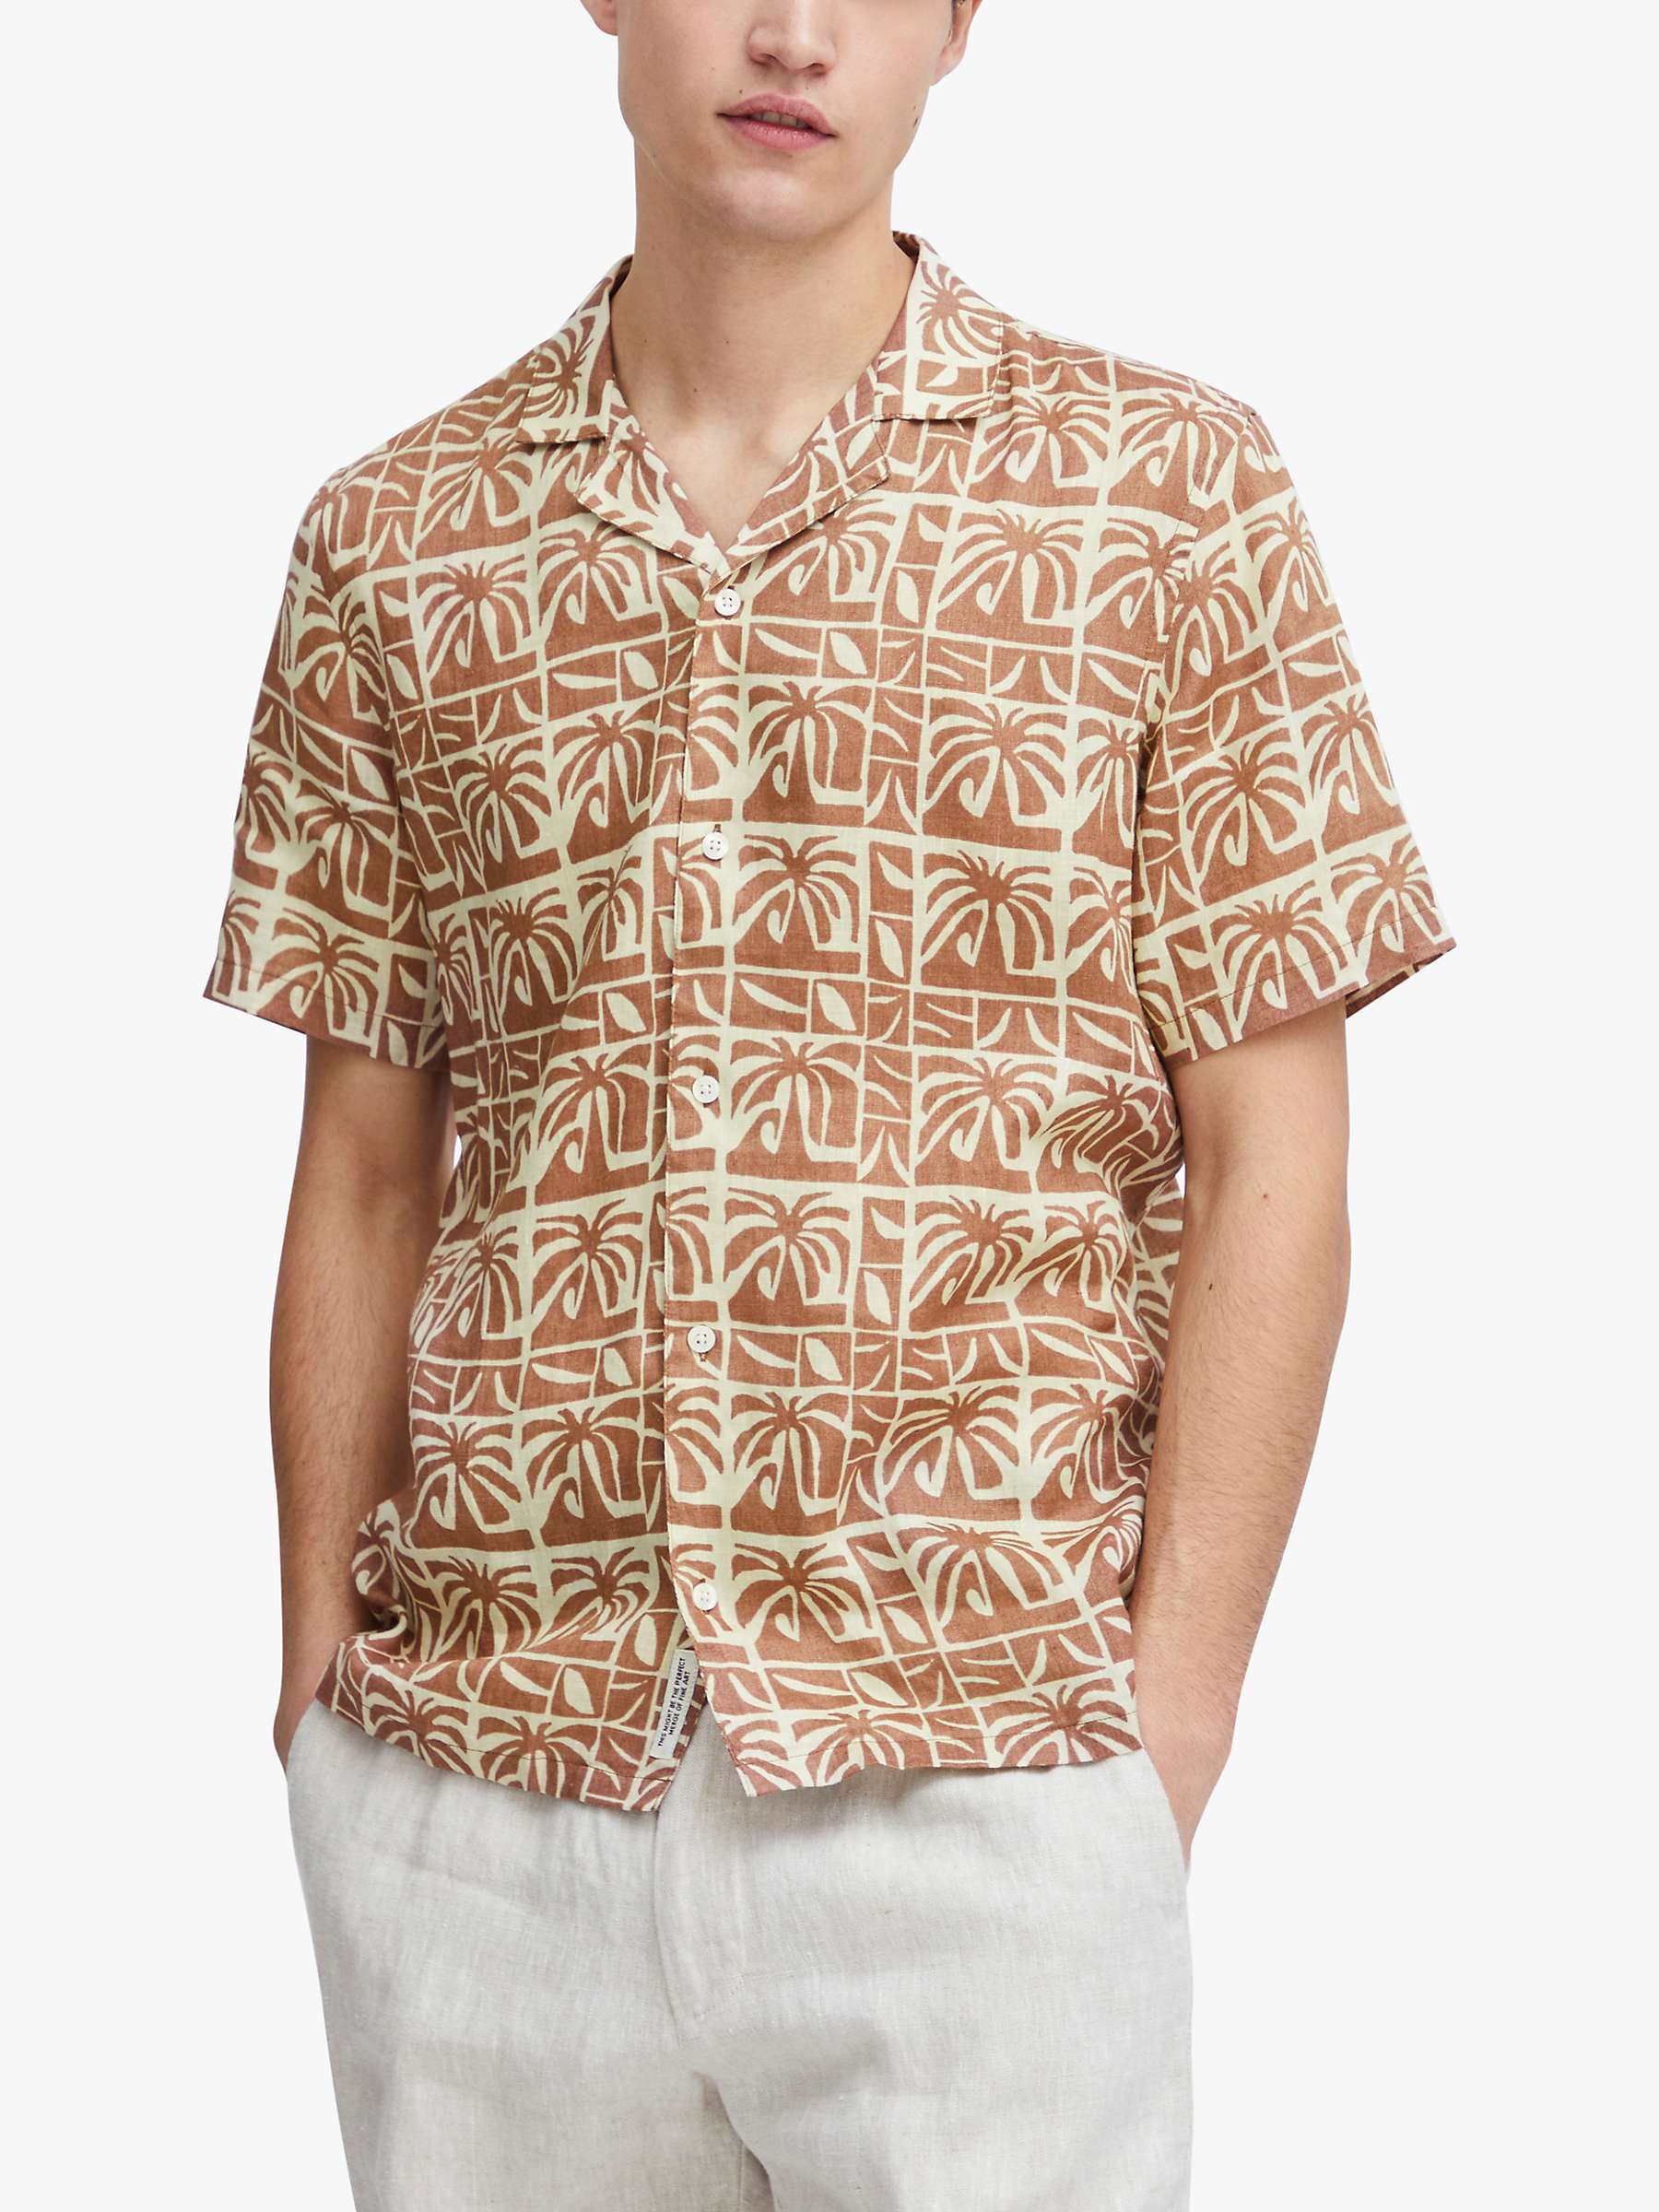 Buy Casual Friday Anton Short Sleeve Palm Linen Shirt Online at johnlewis.com